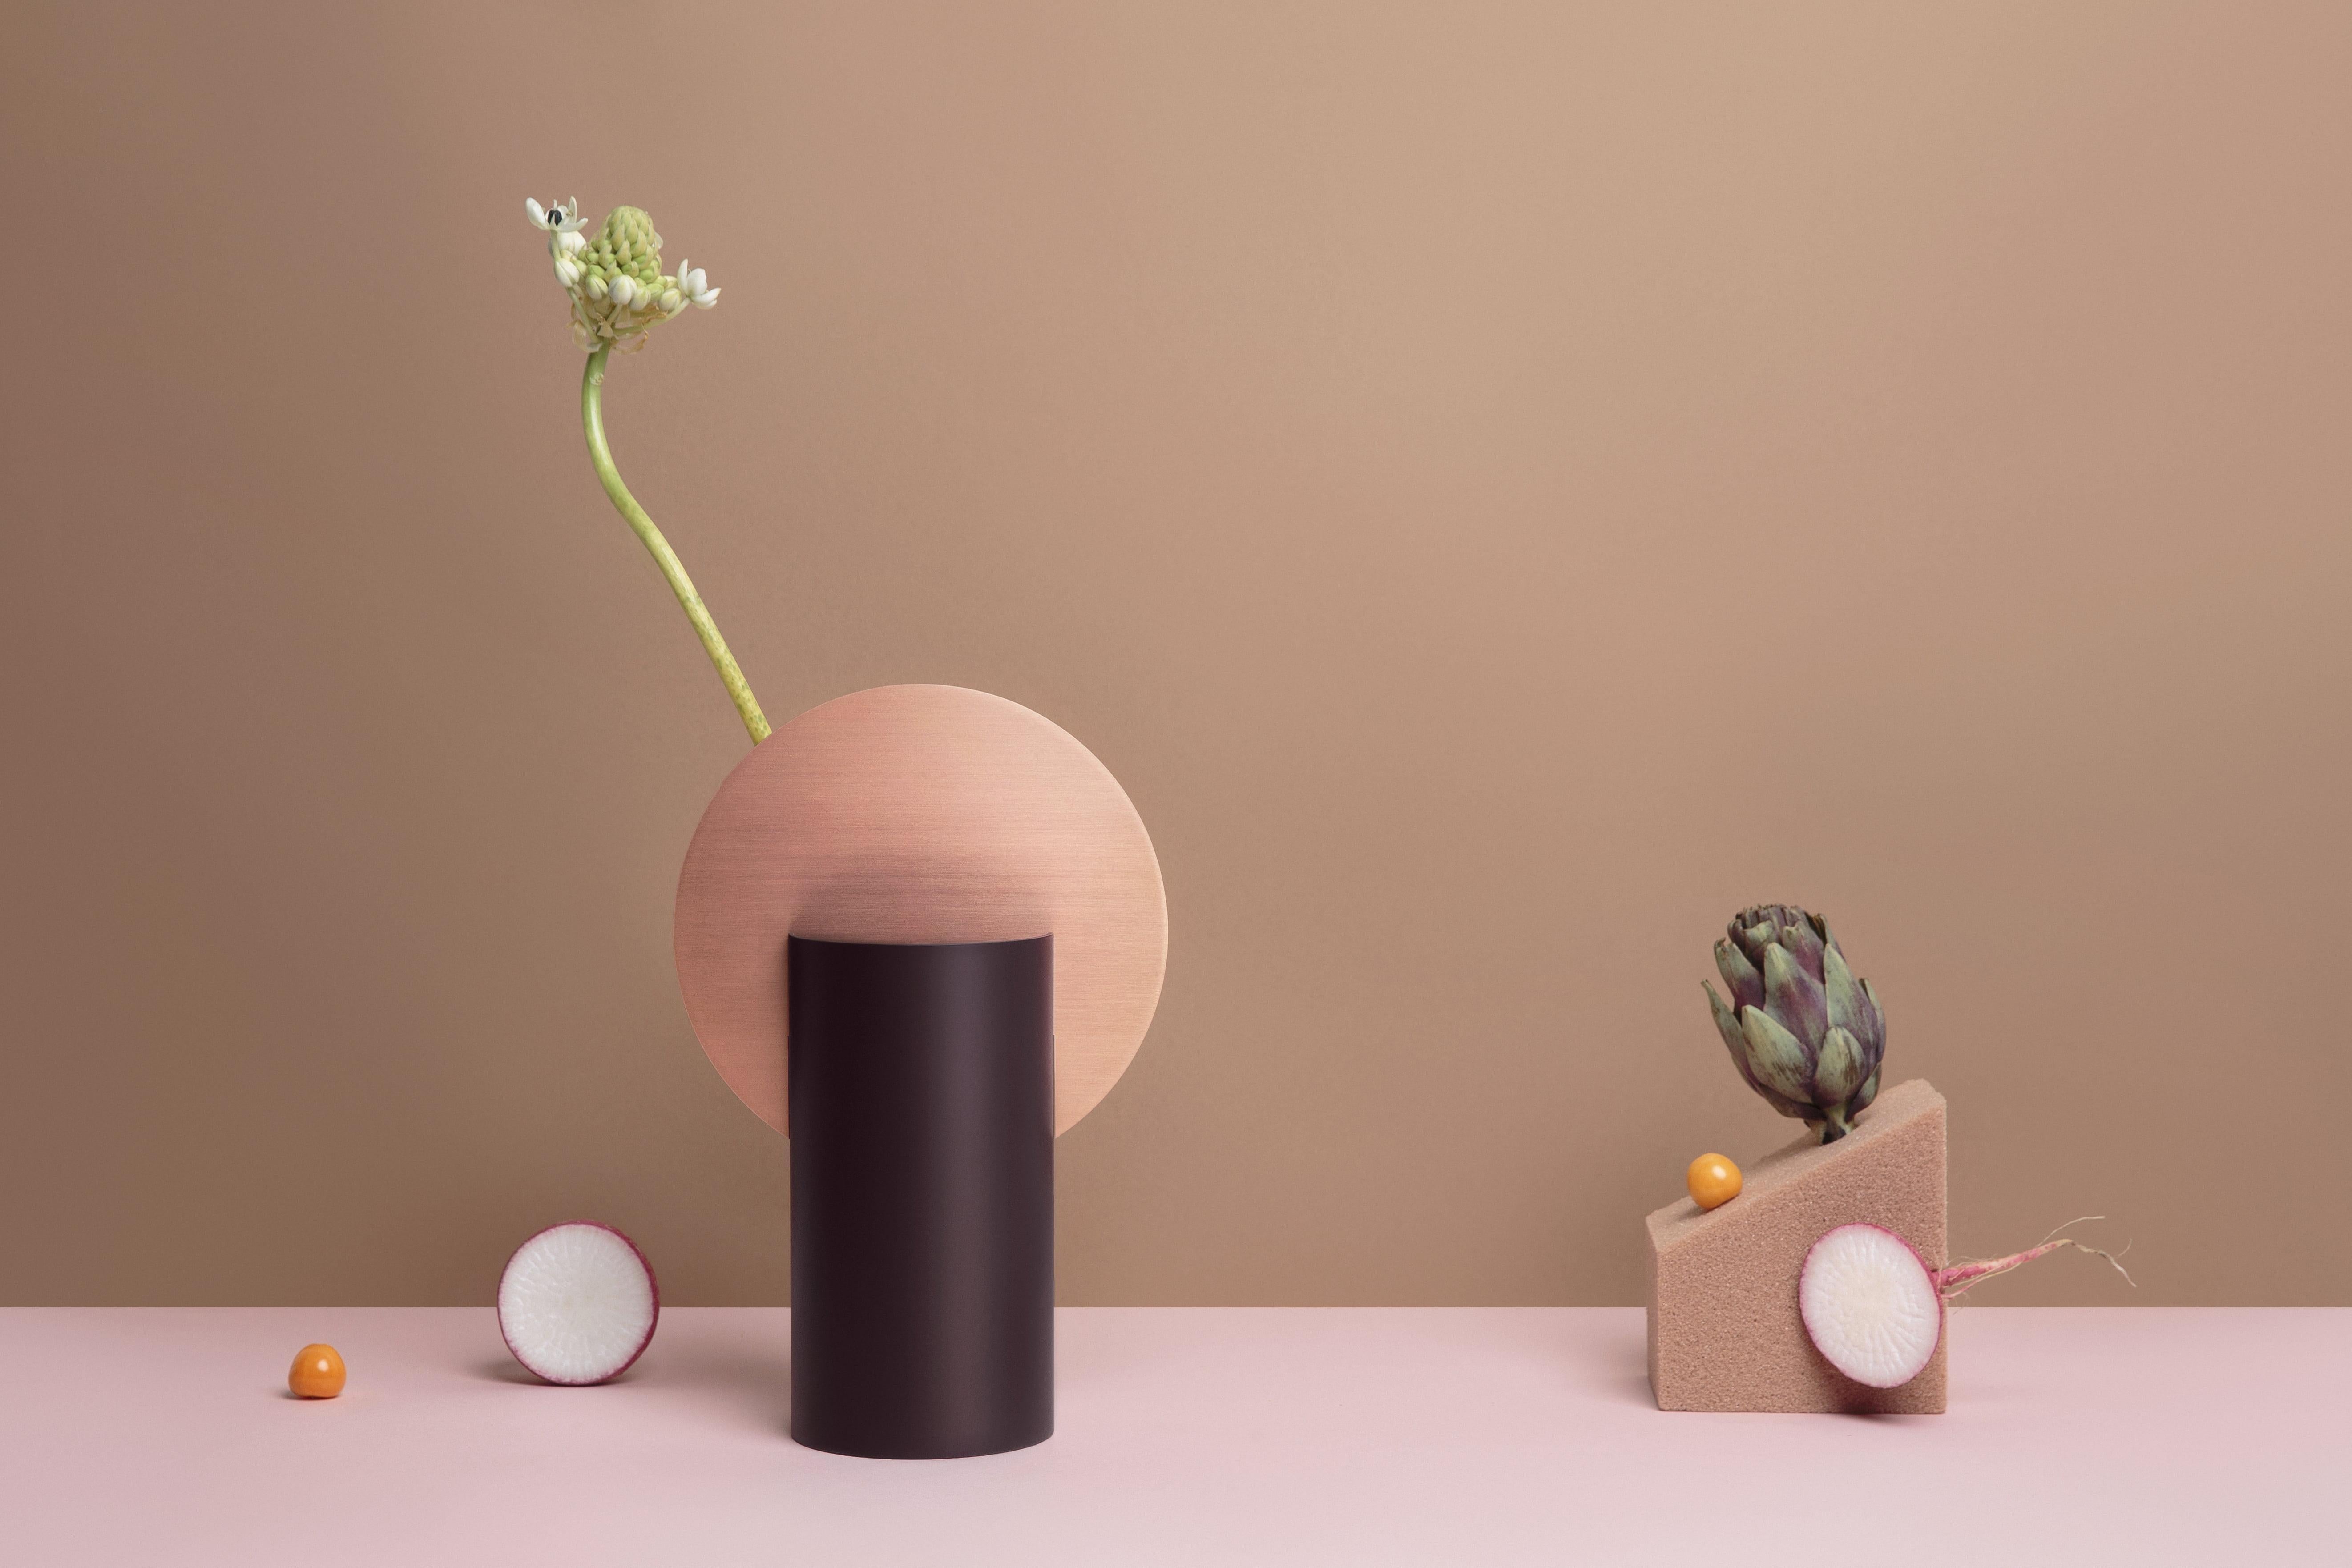 Brand: NOOM
Designer: Kateryna Sokolova
Materials: Copper, painted steel
Color scheme: CS7 - sangria red and copper
Dimensions: H 28.5 cm x W 19 cm x D 10 cm
Net Weight: 1.6 kg.

Malevich vase, one of the vases from the 